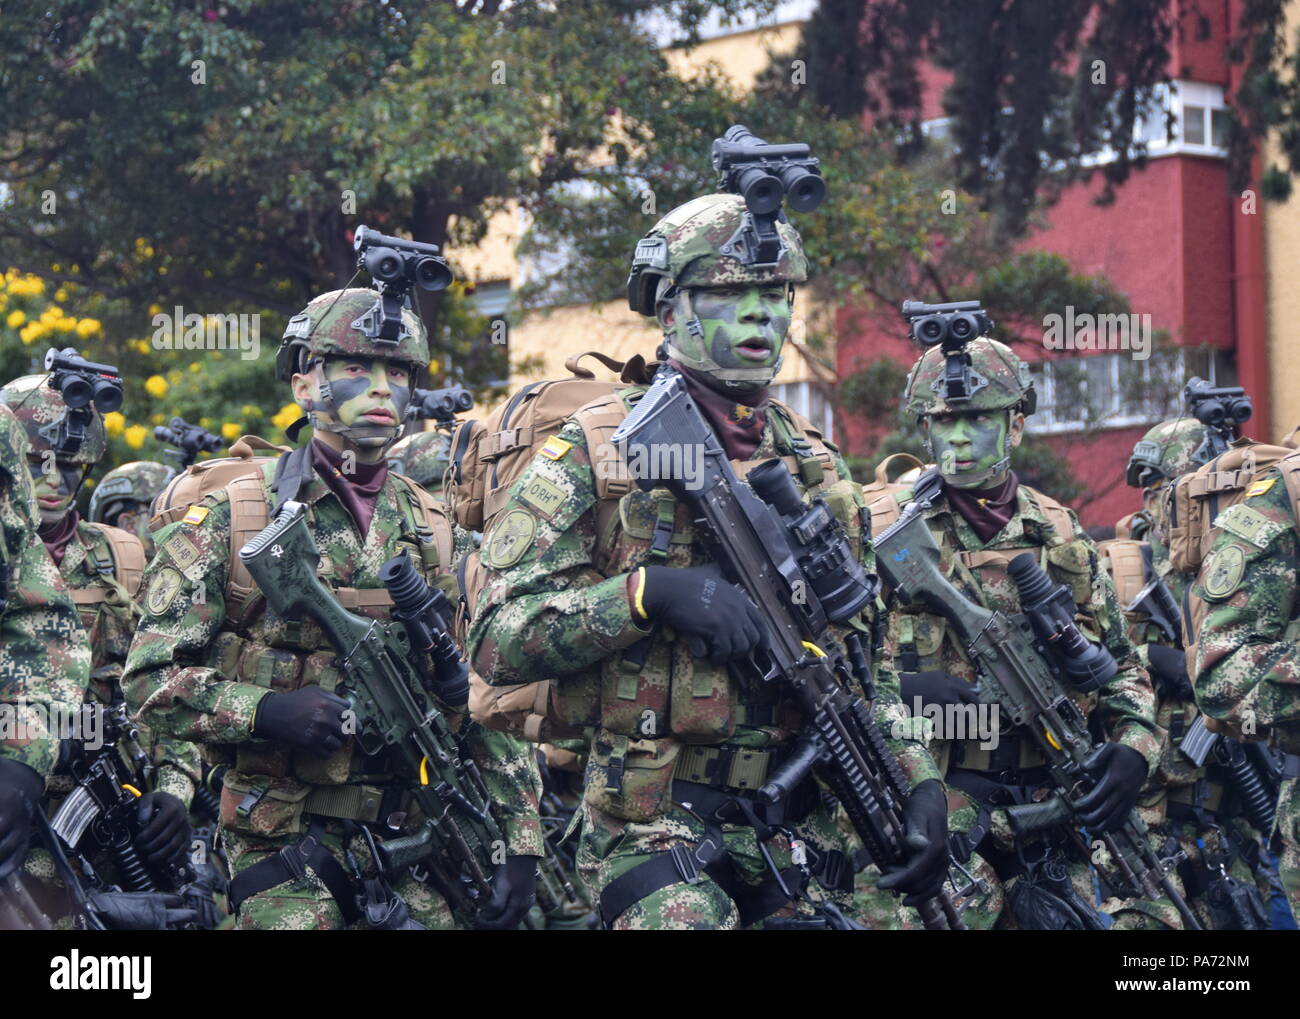 Bogota, Colombia.20 July 2018, Bogota, Colombia - Special Forces at the Colombian Independence Day military parade Credit: James Wagstaff/Alamy Live News Stock Photo